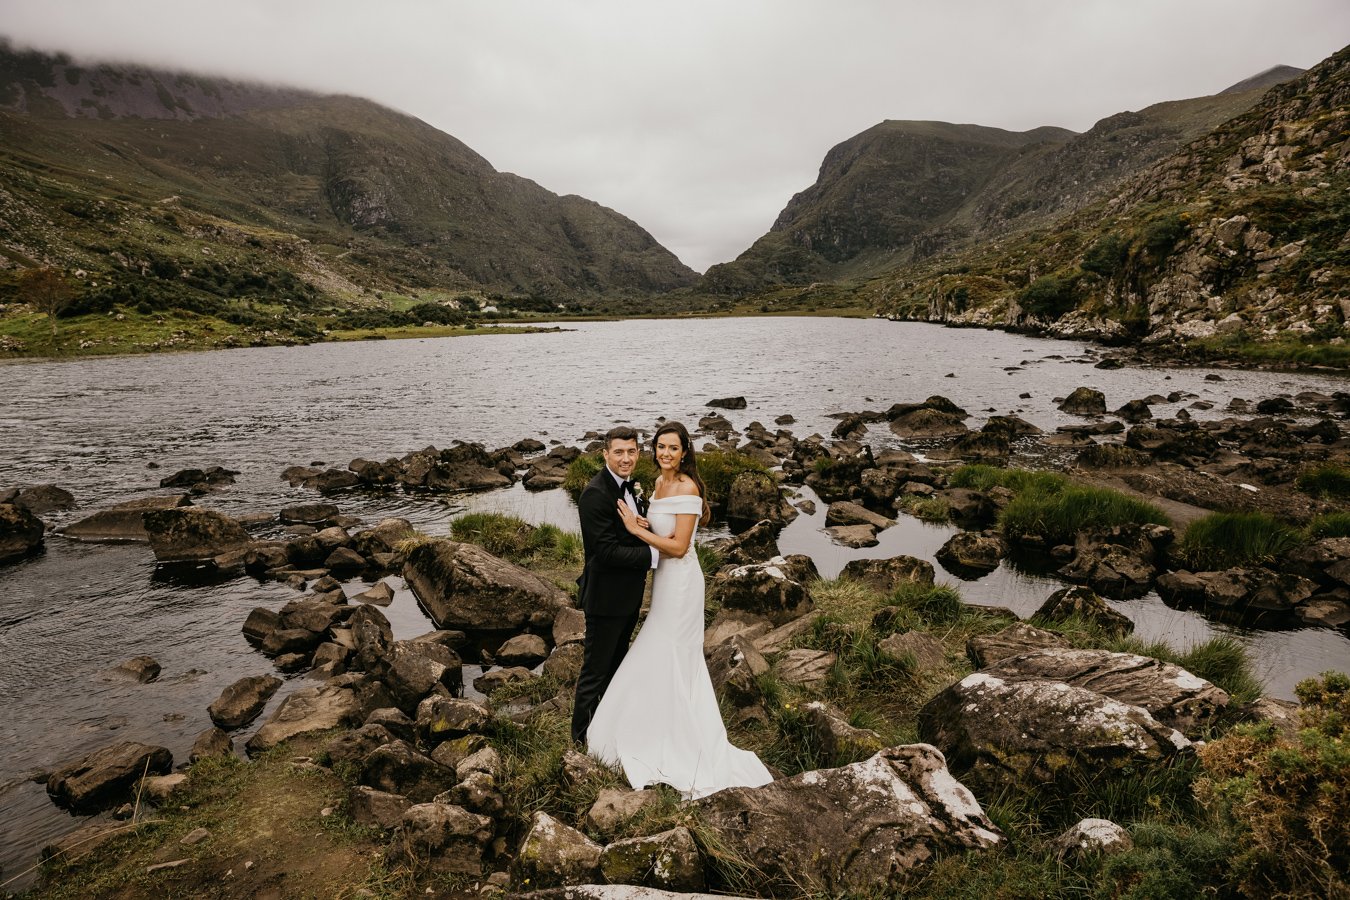 The gap of Dunloe for wedding photos in Kerry